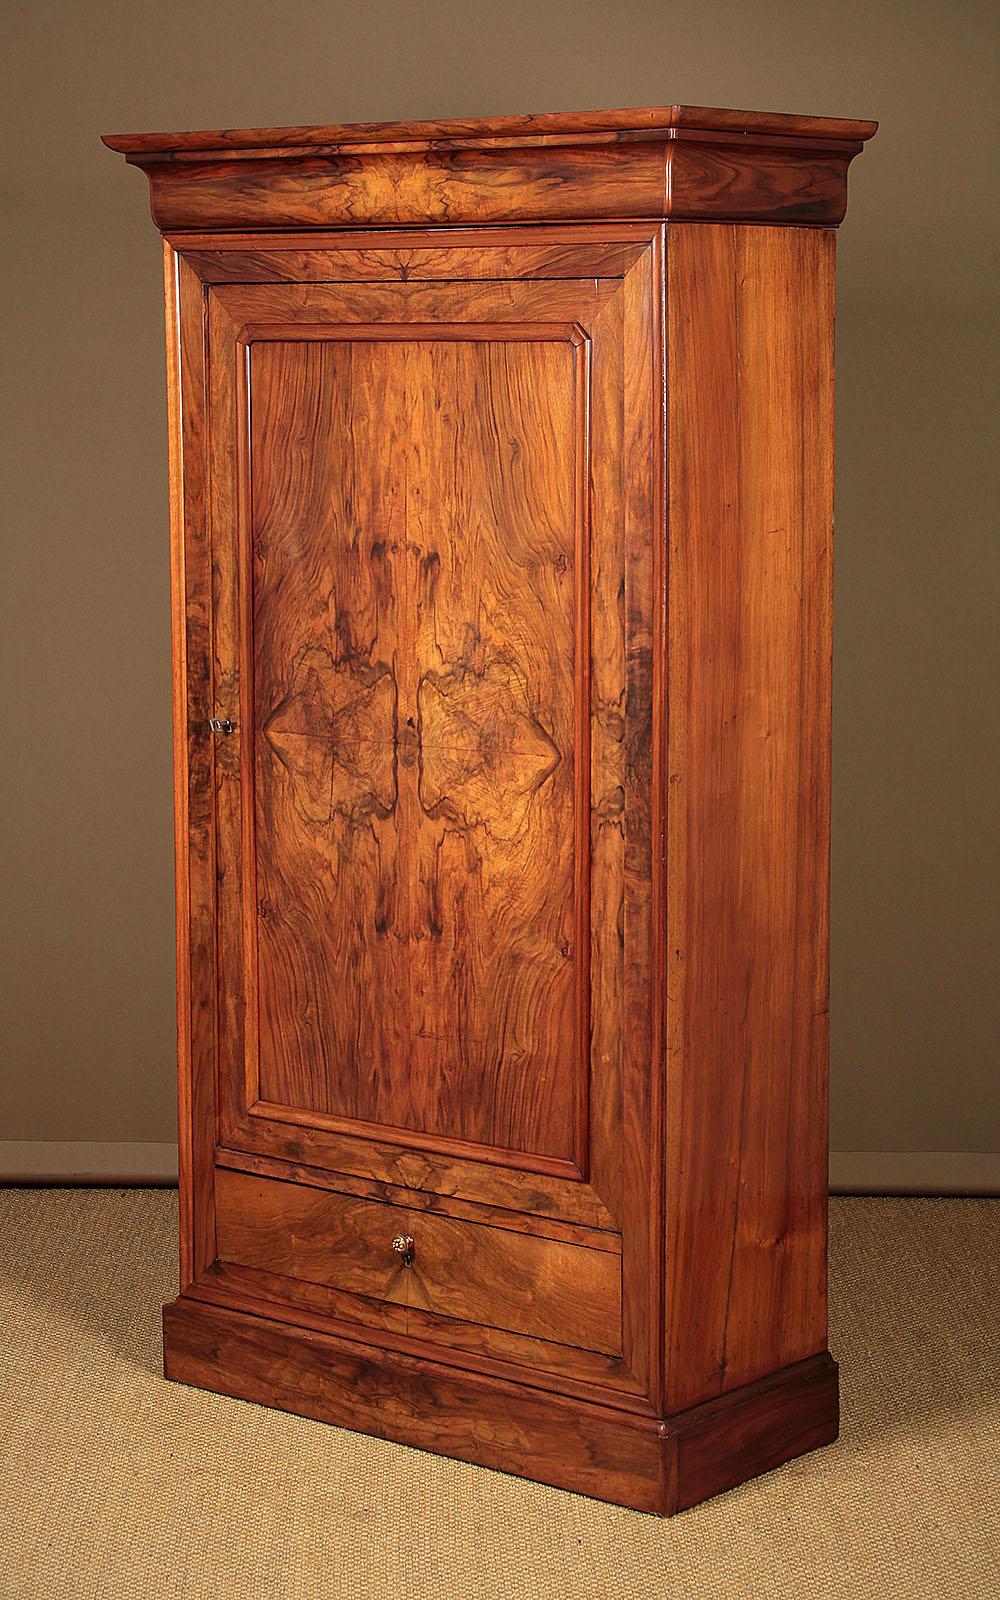 An attractive early 19th century burr walnut linen press, wardrobe or hall cupboard with useful narrow dimensions. Could be used as a kitchen store cupboard or perhaps a shoe or hall locker. Single door cupboard fitted inside with four adjustable